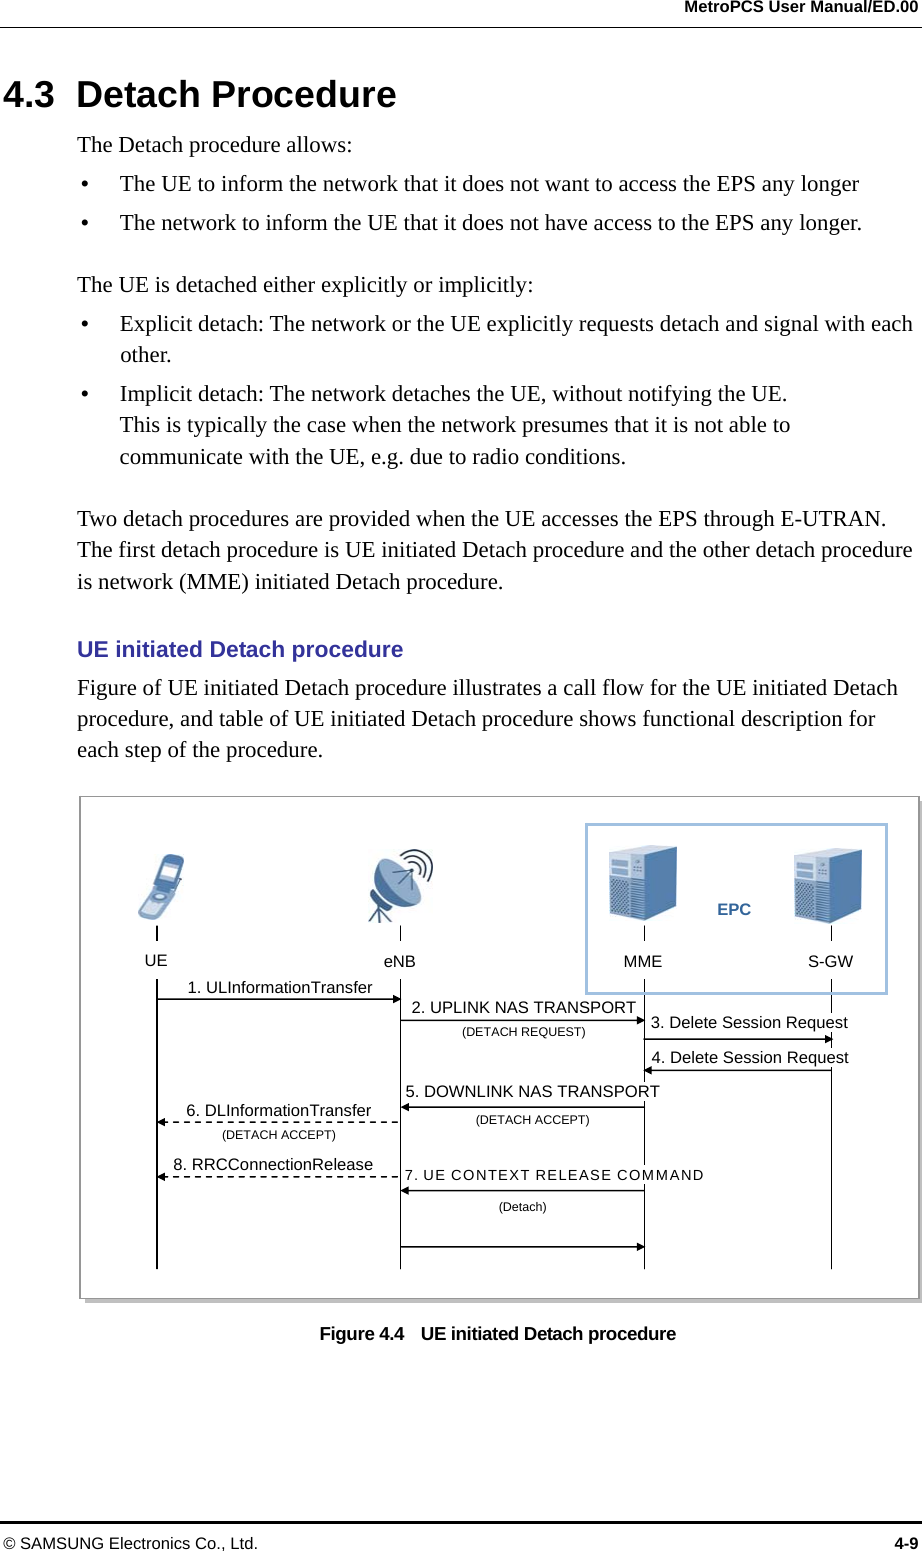  MetroPCS User Manual/ED.00 © SAMSUNG Electronics Co., Ltd.  4-9 4.3 Detach Procedure The Detach procedure allows: y The UE to inform the network that it does not want to access the EPS any longer y The network to inform the UE that it does not have access to the EPS any longer.  The UE is detached either explicitly or implicitly: y Explicit detach: The network or the UE explicitly requests detach and signal with each other. y Implicit detach: The network detaches the UE, without notifying the UE. This is typically the case when the network presumes that it is not able to communicate with the UE, e.g. due to radio conditions.  Two detach procedures are provided when the UE accesses the EPS through E-UTRAN. The first detach procedure is UE initiated Detach procedure and the other detach procedure is network (MME) initiated Detach procedure.  UE initiated Detach procedure Figure of UE initiated Detach procedure illustrates a call flow for the UE initiated Detach procedure, and table of UE initiated Detach procedure shows functional description for each step of the procedure.  Figure 4.4    UE initiated Detach procedure UE  eNB MME  S-GW EPC 1. ULInformationTransfer 3. Delete Session Request 2. UPLINK NAS TRANSPORT (DETACH REQUEST) 4. Delete Session Request 5. DOWNLINK NAS TRANSPORT (DETACH ACCEPT) 7. UE CONTEXT RELEASE COMMAND 6. DLInformationTransfer (DETACH ACCEPT) 8. RRCConnectionRelease (Detach) 